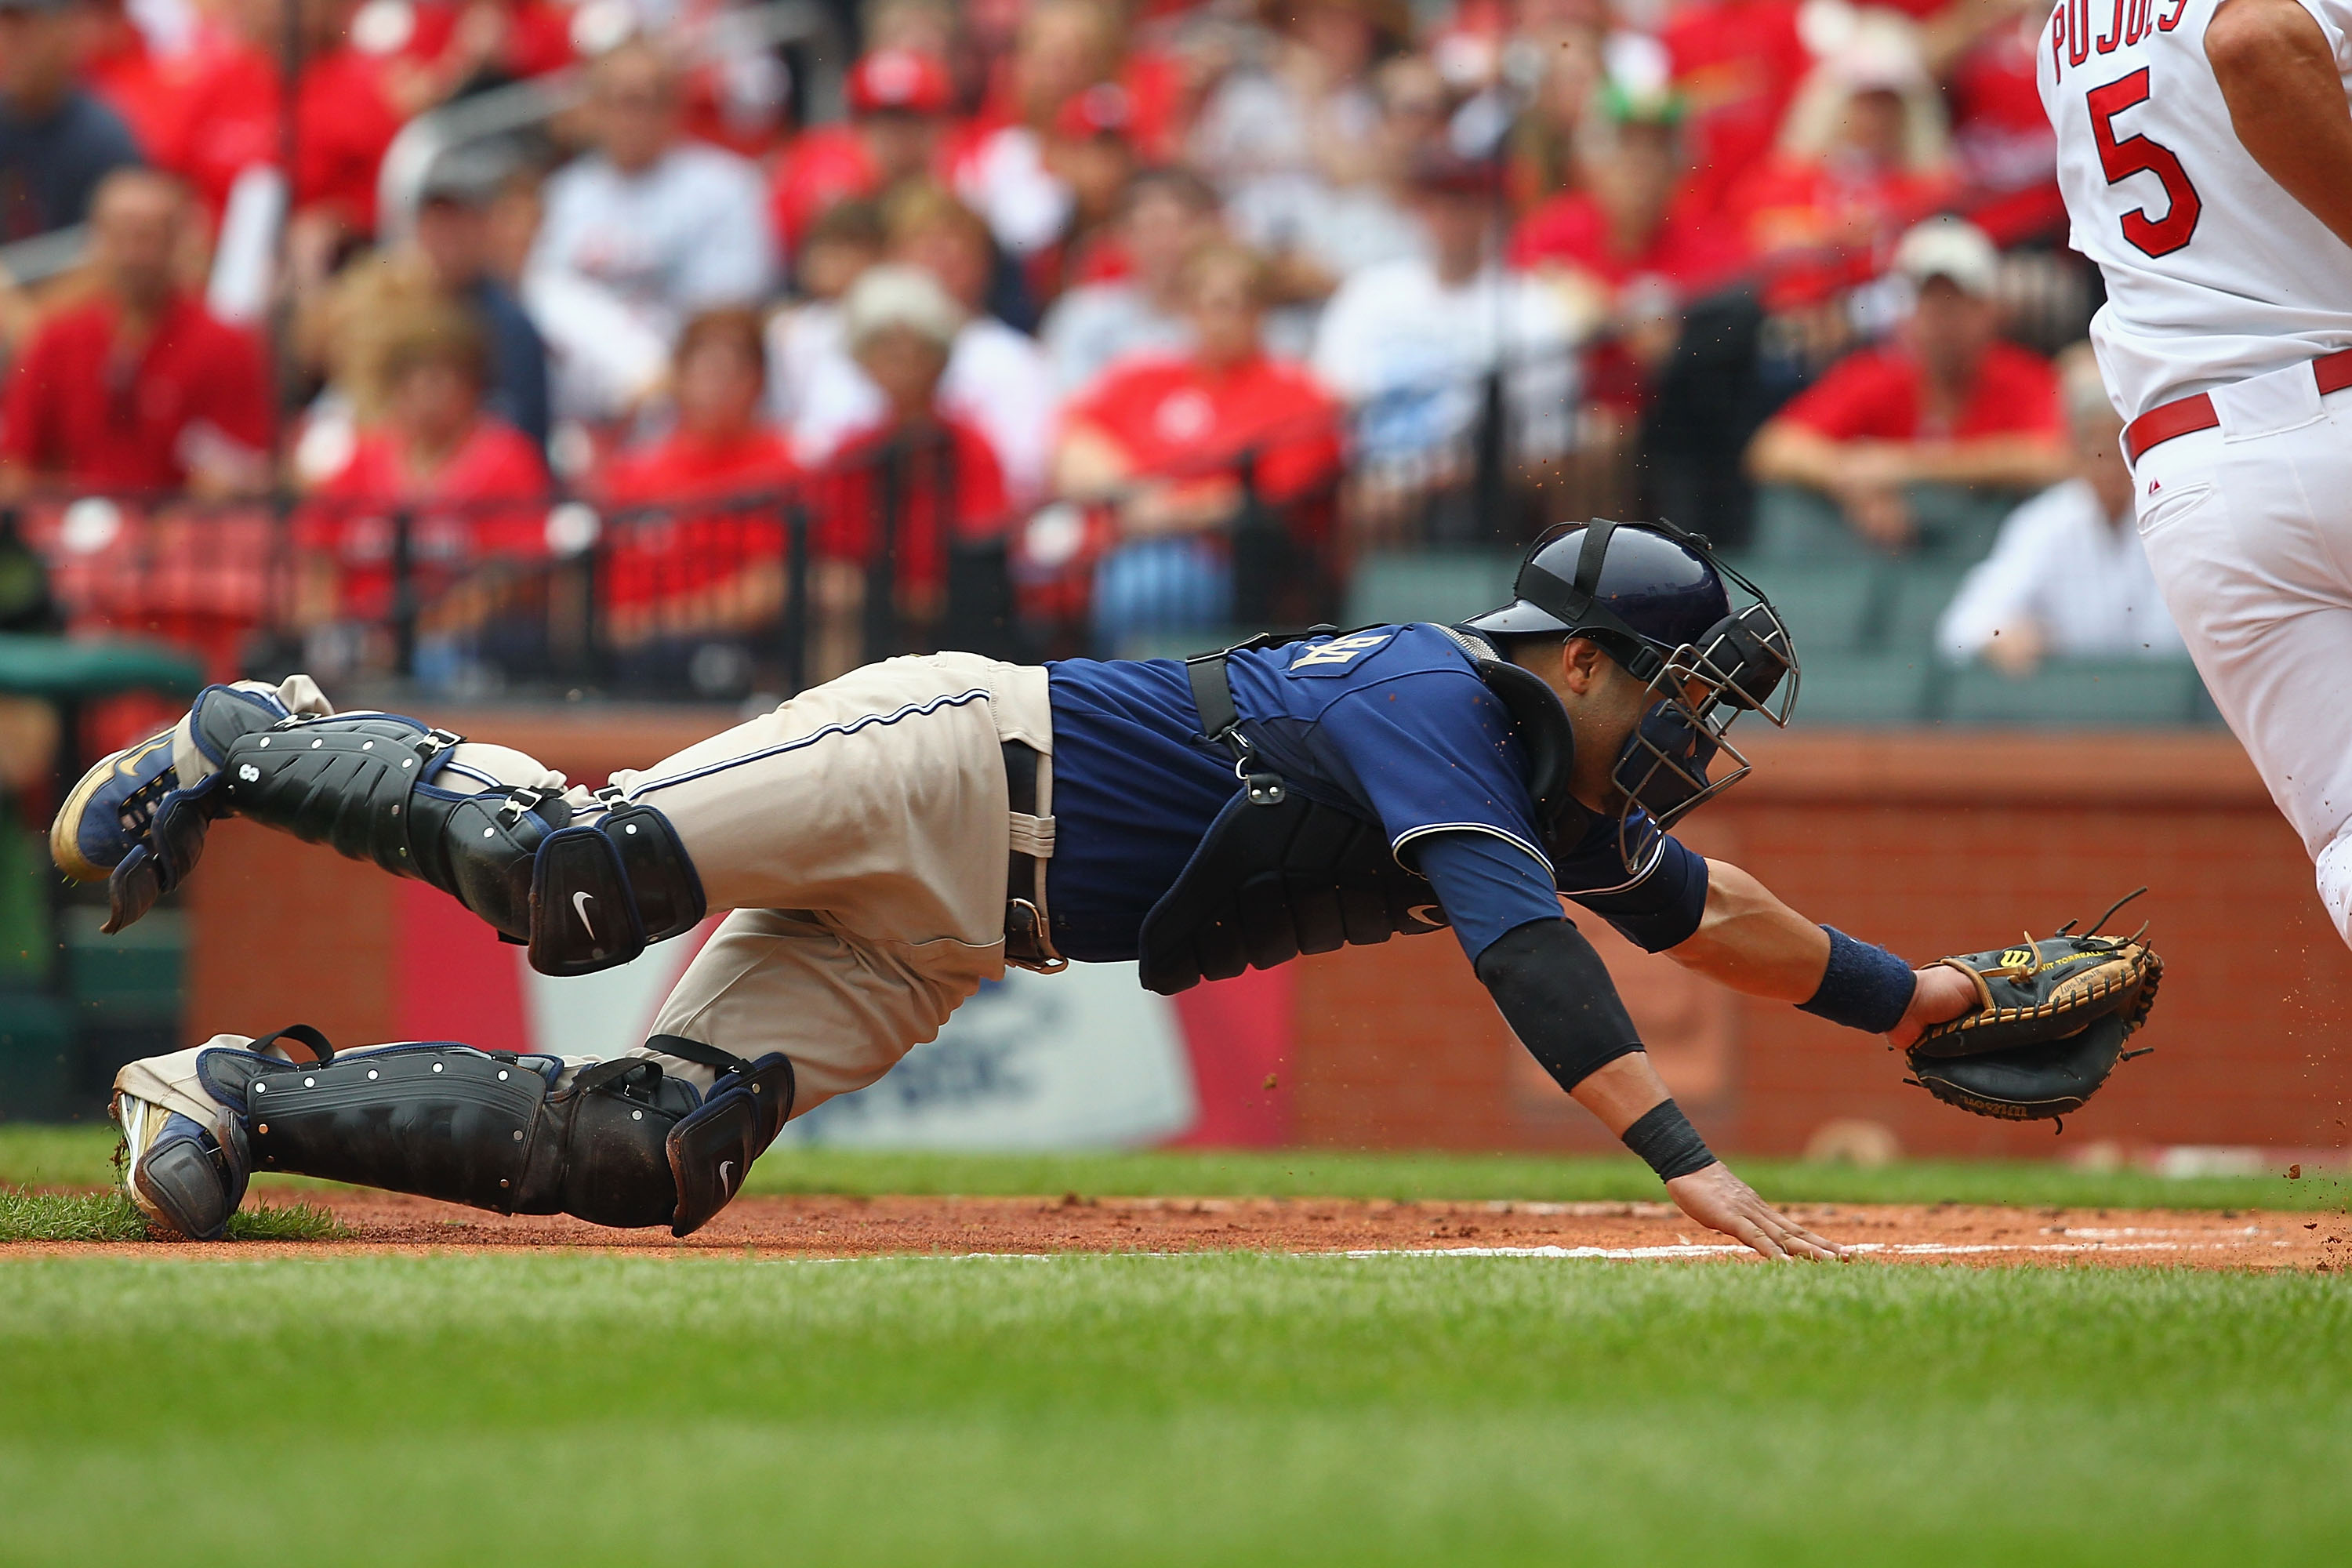 ST. LOUIS - SEPTEMBER 19: Yorvit Torrealba #8 of the San Diego Padres attempts to tag out Albert Pujols #5 of the St. Louis Cardinals at Busch Stadium on September 19, 2010 in St. Louis, Missouri.  The Cardinals beat the Padres 4-1.  (Photo by Dilip Vishw